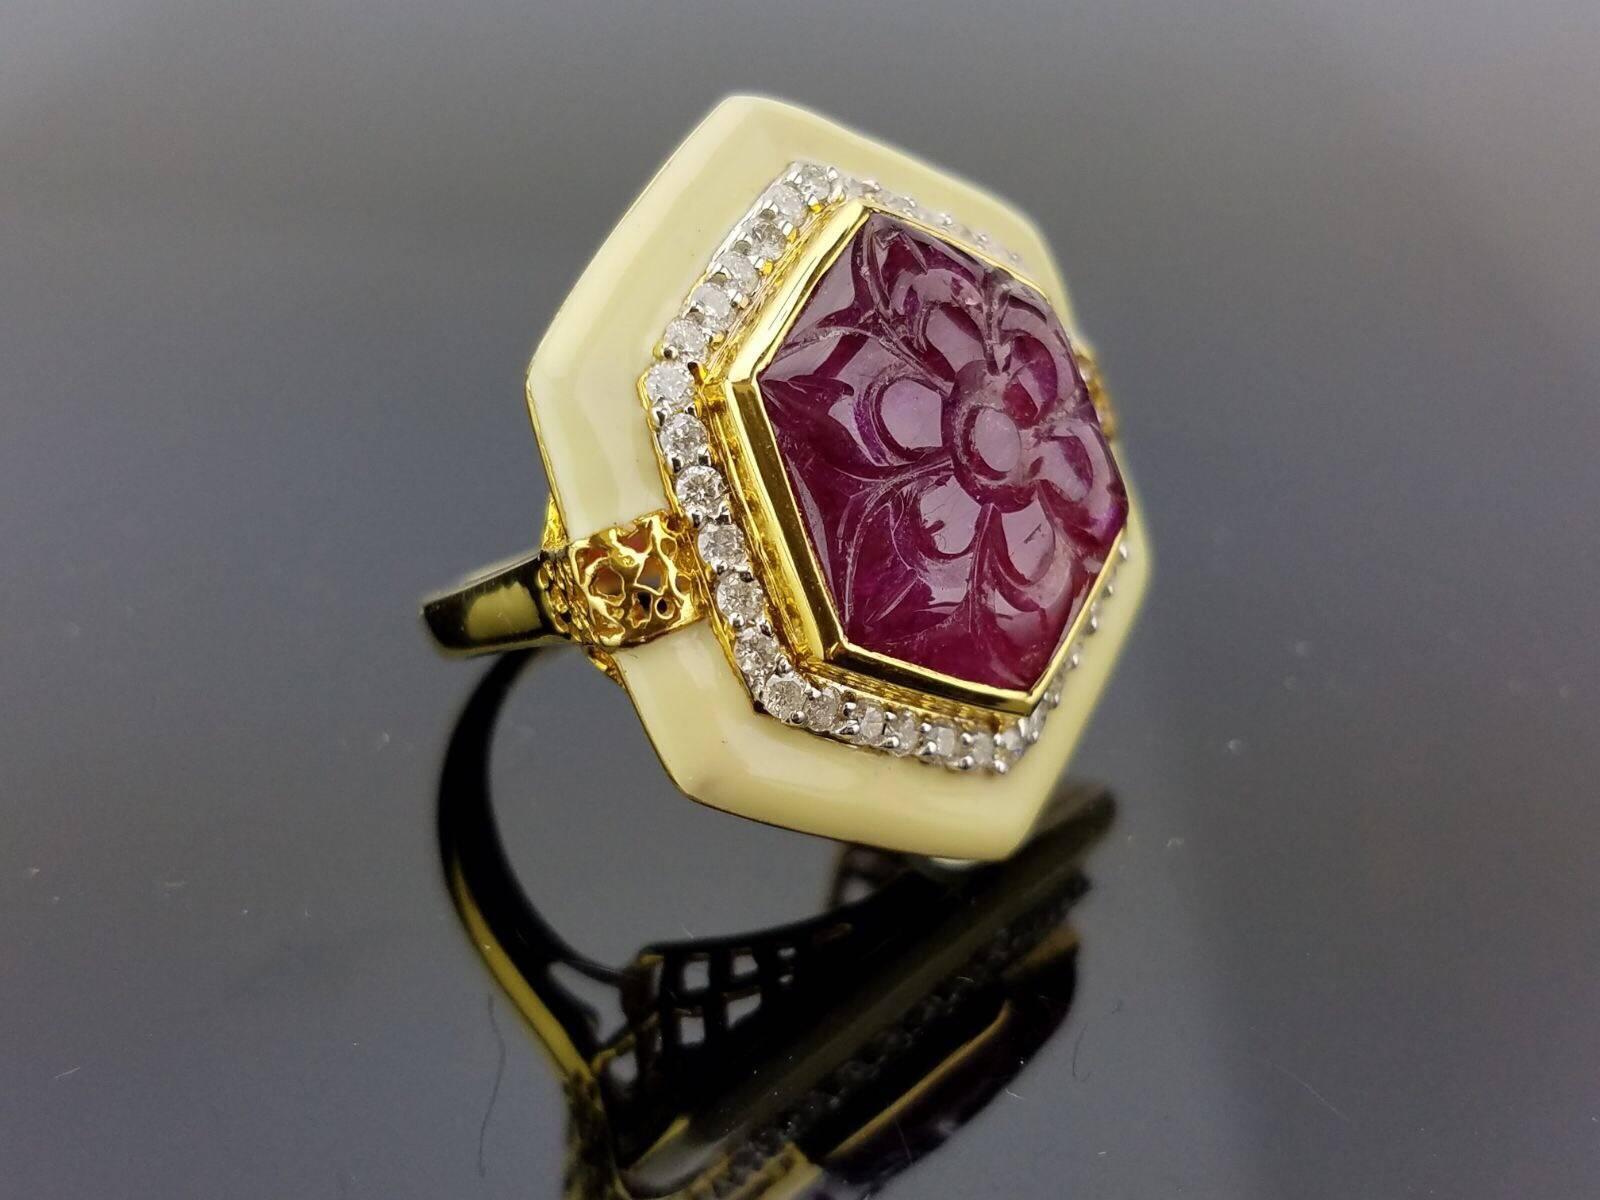 Beautiful, intricitally carved ruby cocktail ring, sorrounded by white diamonds and white enamel - all set in 18K yellow gold. 

Stone Details: 
Stone: Ruby 
Carat Weight: 11.00 Carat

Diamond Details:
Total Carat Weight: 0.58 carat
Quality: VS/SI ,